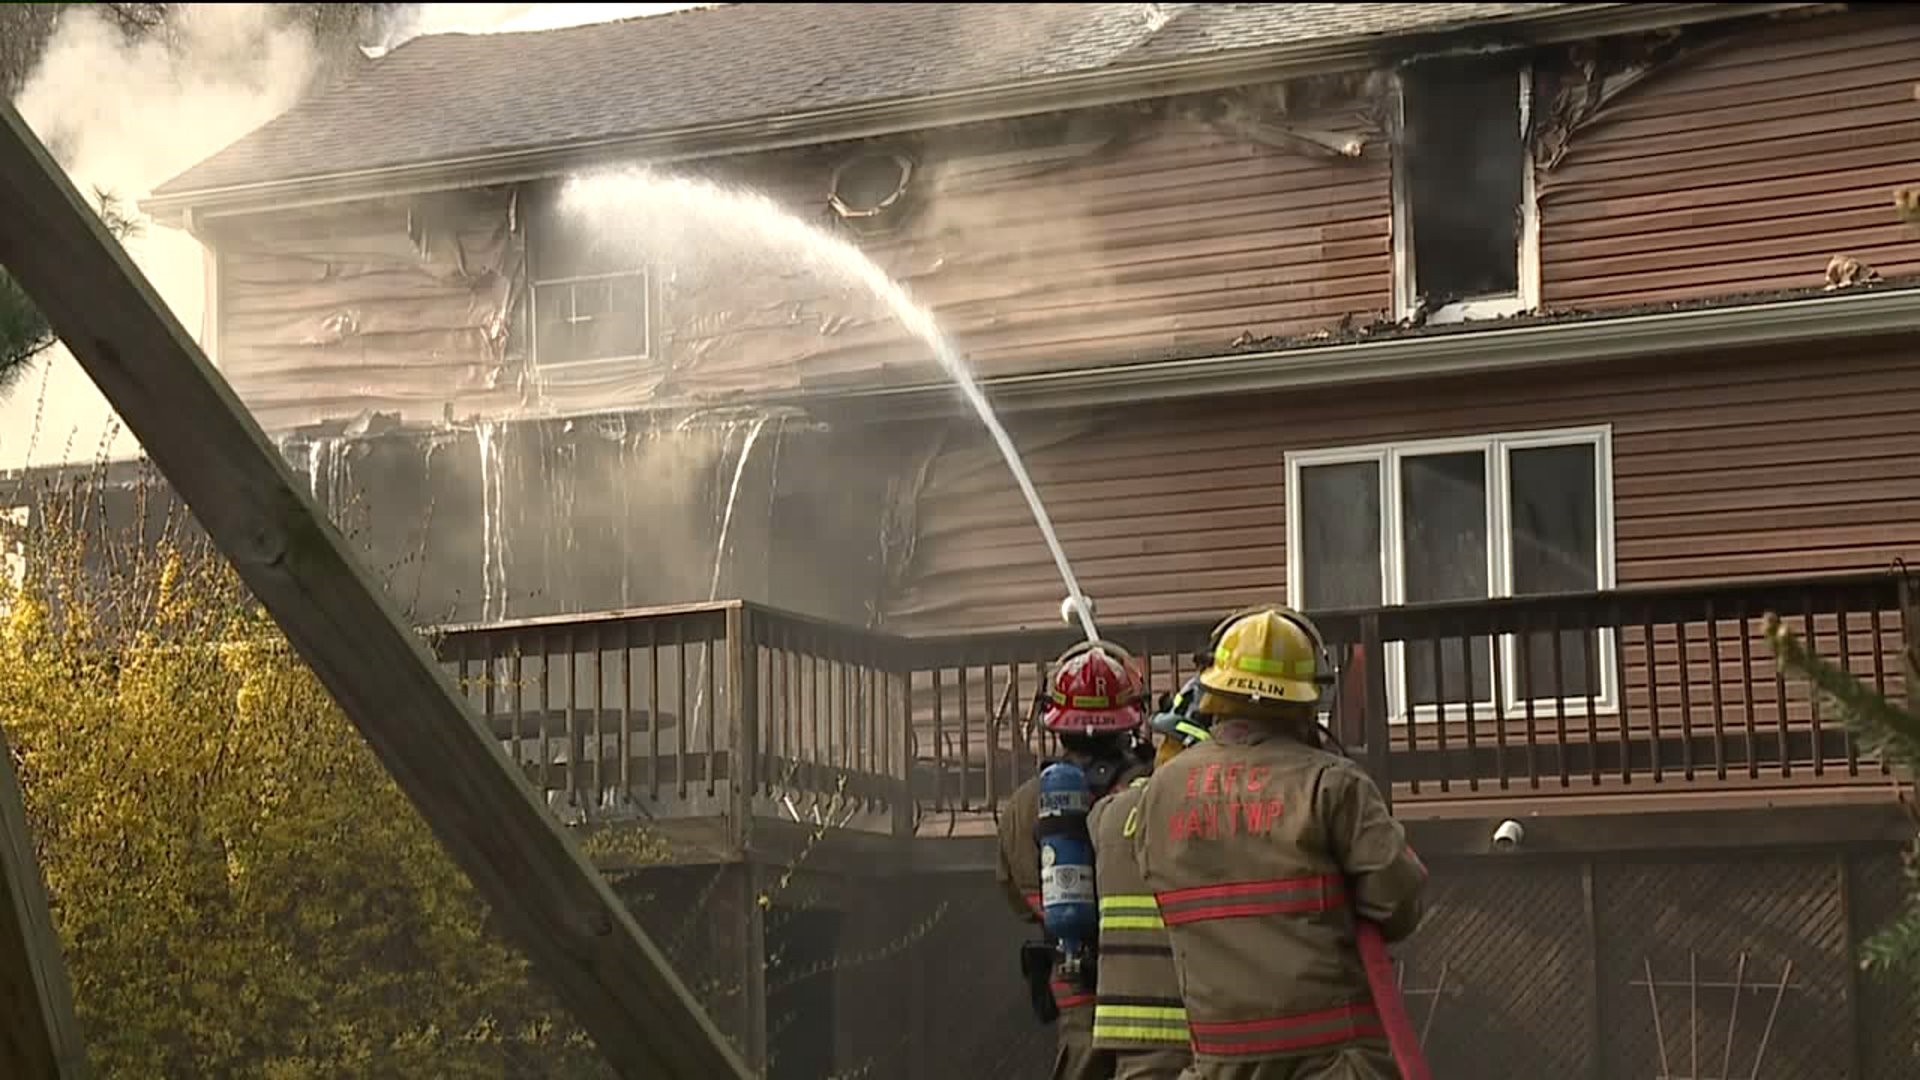 Boy in Mahoning Township Comes Home from School to Find a Fire